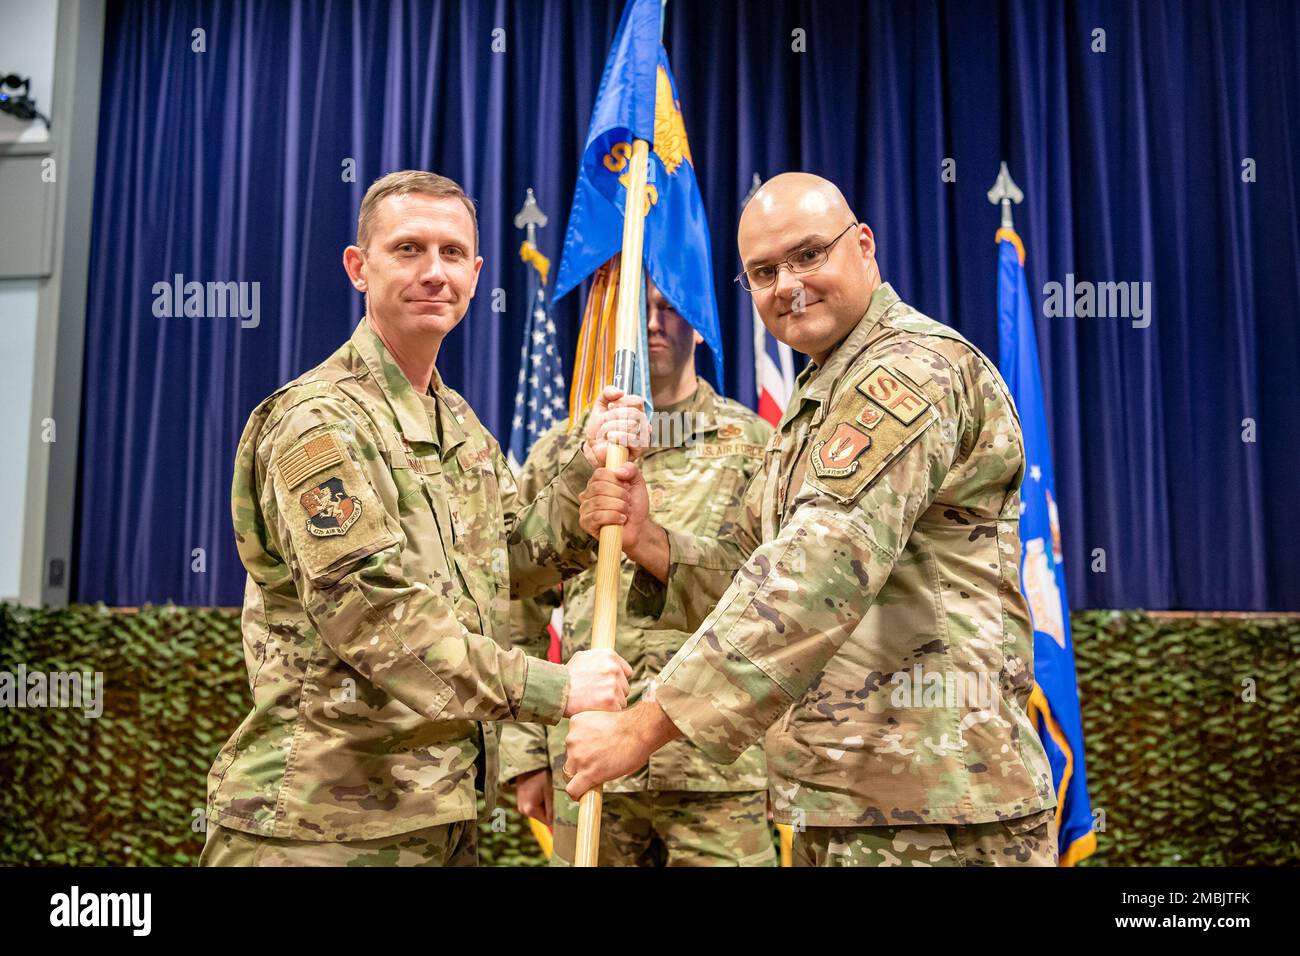 U.S. Air Force Maj. Kendall P. Benton, right, 422d Security Forces Squadron incoming commander, receives the 422d SFS guidon from Col. Jon T. Hannah, 422d Air Base Group commander, during a change of command ceremony at RAF Croughton, England, June 16, 2022. Prior to assuming command of the 422d SFS, Benton served as the Action Officer for the Policy Branch in the Air Force Security Forces Directorate at the Pentagon in Washington, D.C. Stock Photo